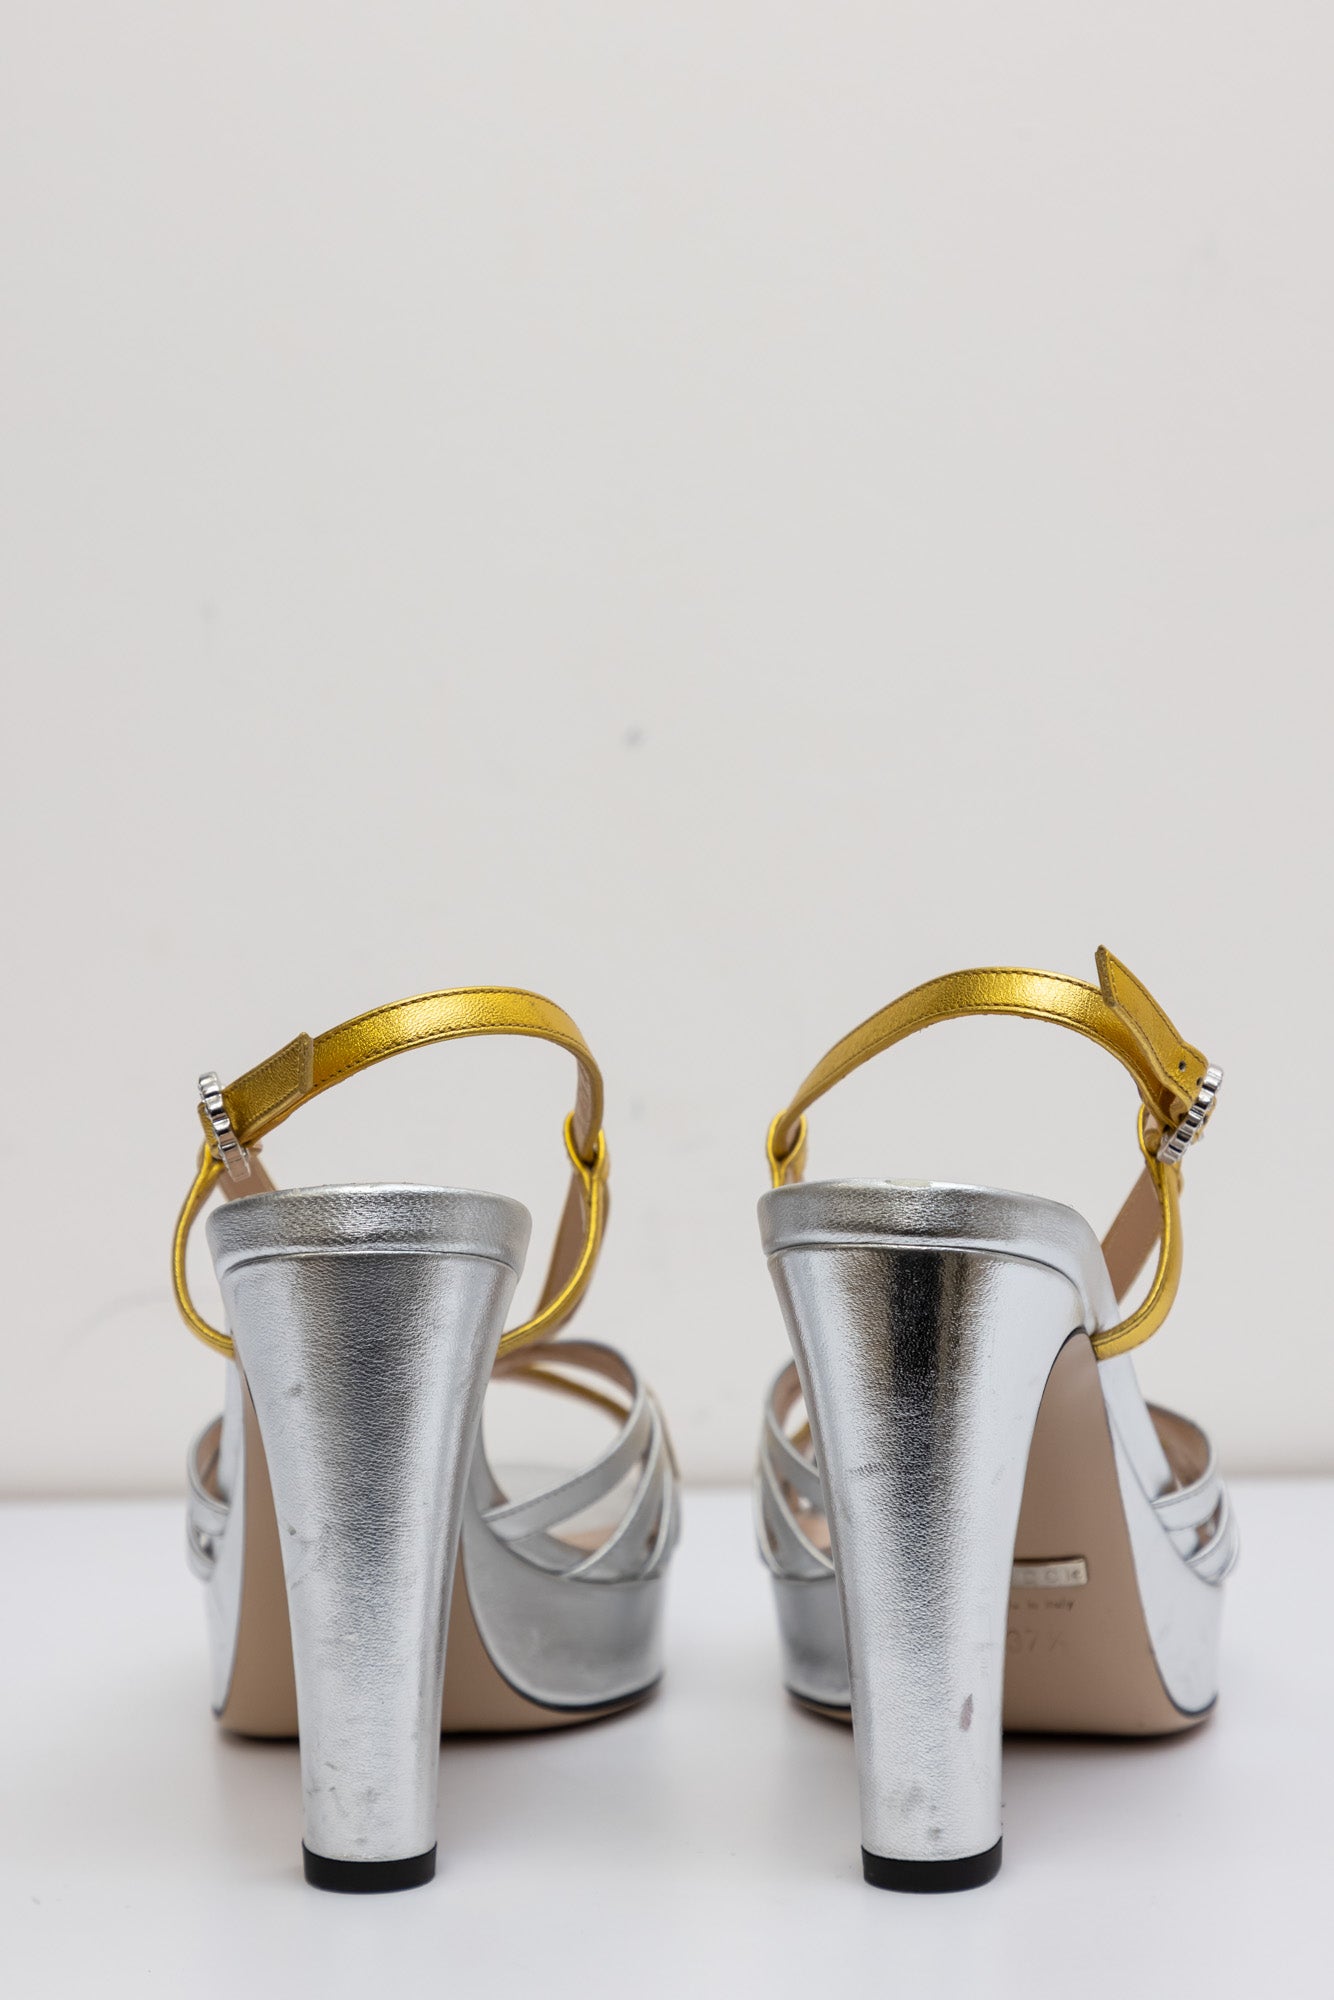 GUCCI Metallic Silver Calf Leather Sandals | Size IT 37.5 | Very Good Condition | Very Comfortable | Made in Italy